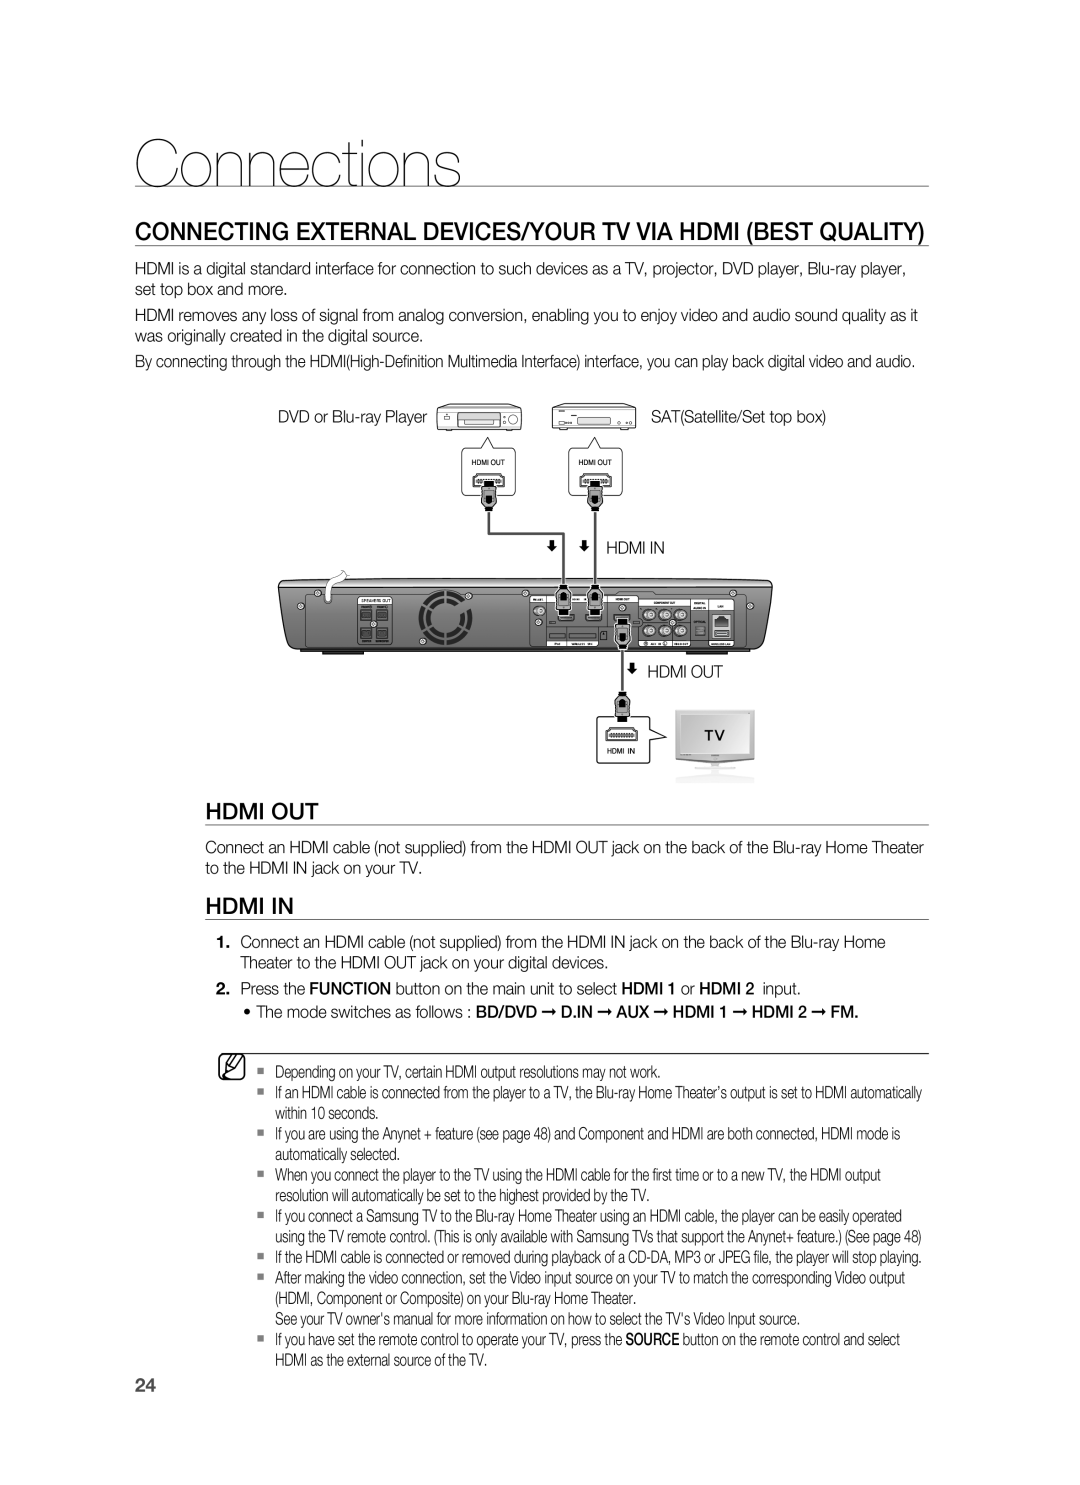 Samsung AH68-02231A, HT-BD3252A user manual Hdmi Out, Hdmi In, Connections 